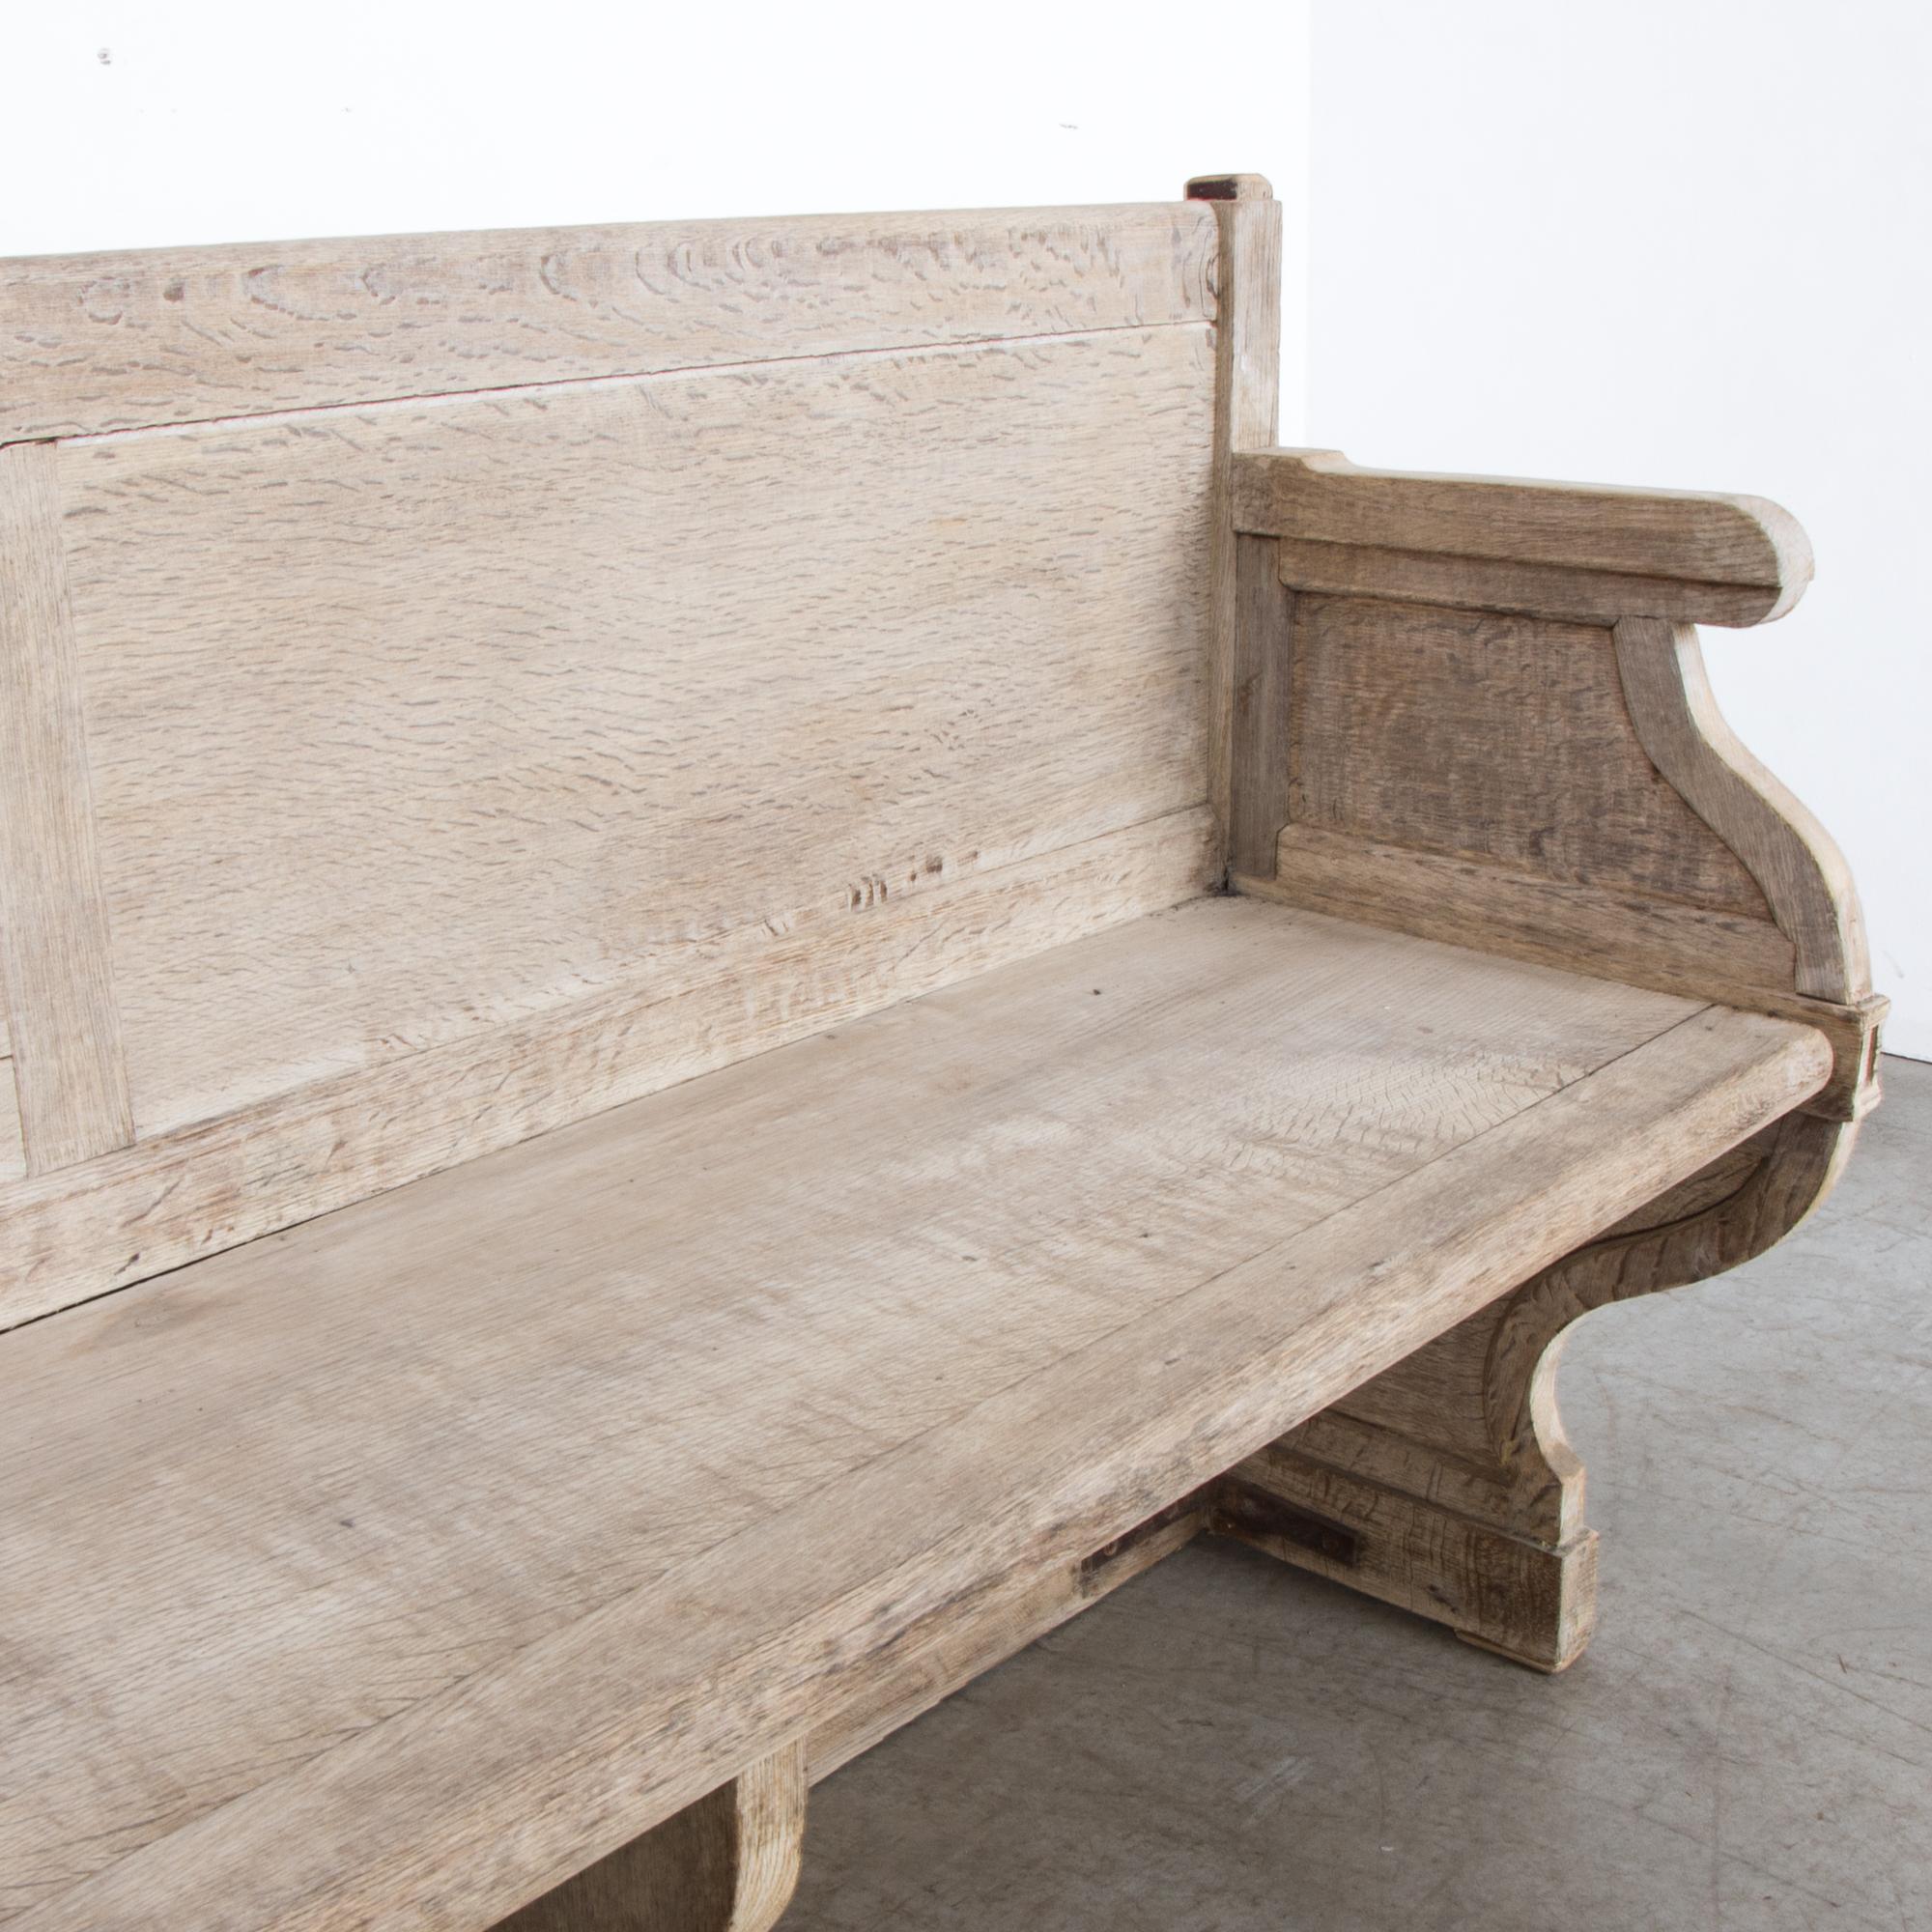 French Provincial Antique French Bench Seat